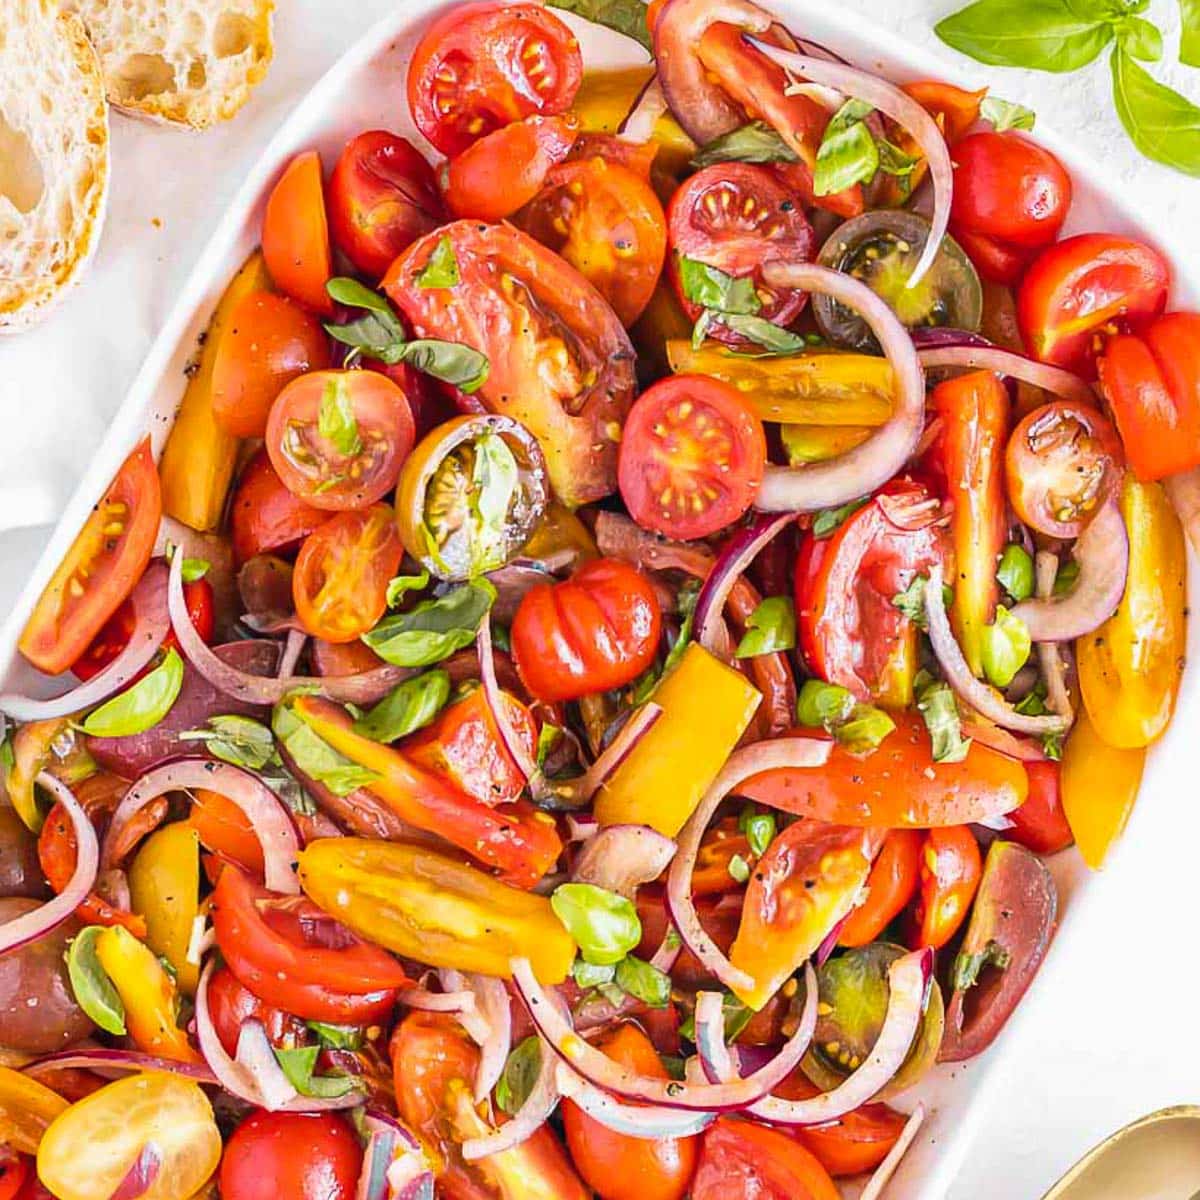 Tomato salad recipe with basil leaves